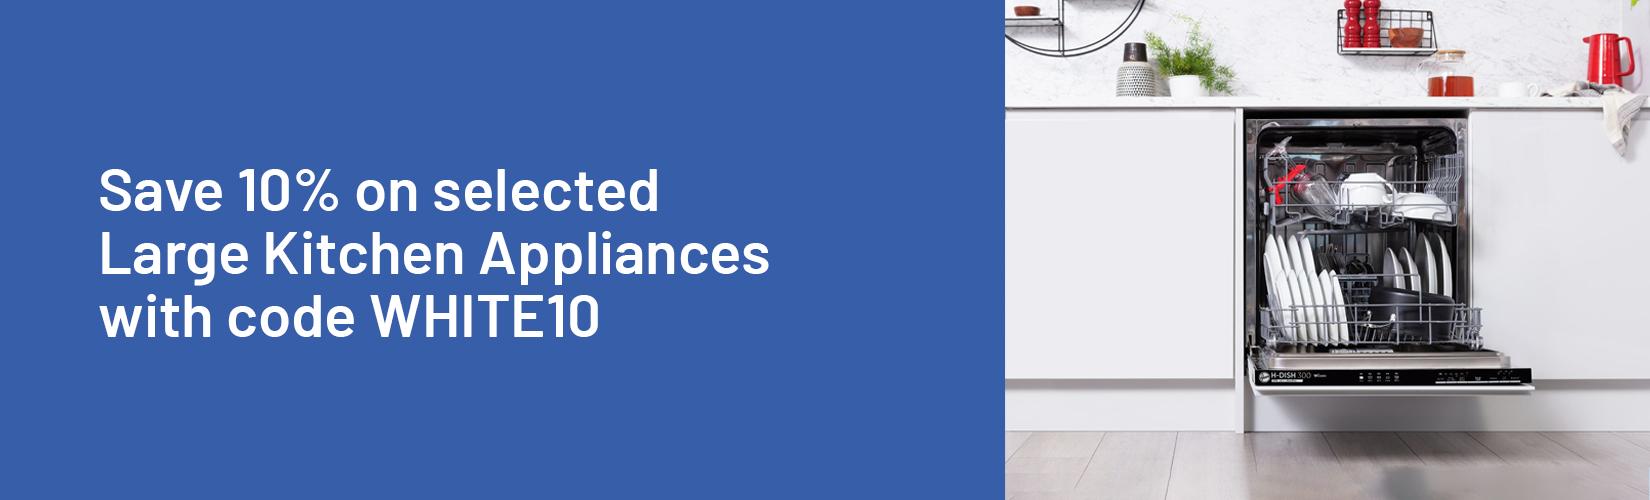 Save 10% on selected large kitchen appliances with code WHITE10.